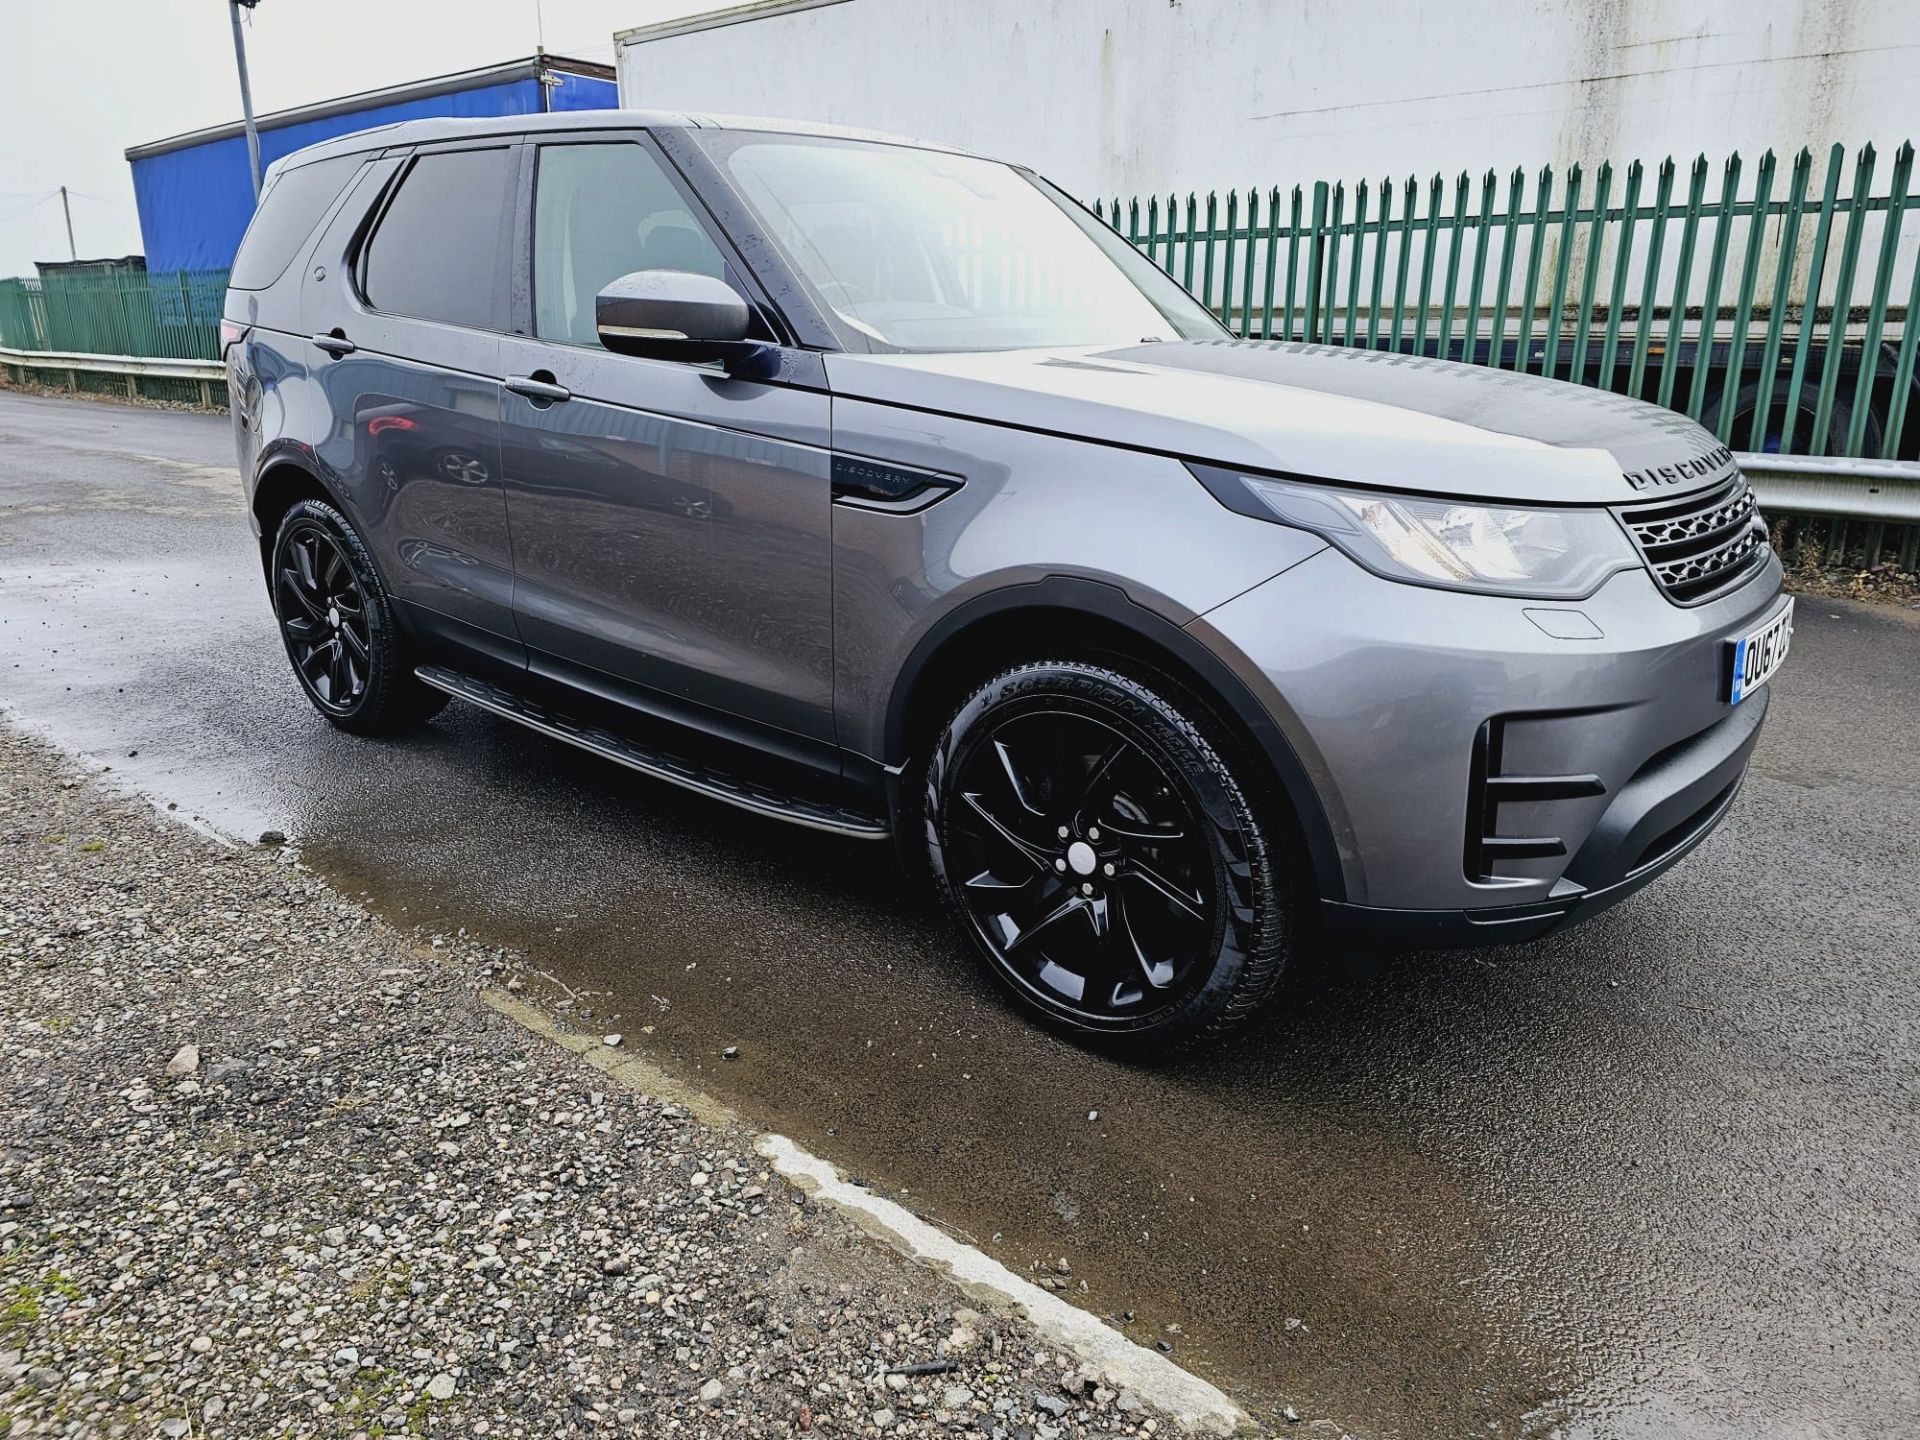 Land Rover Discovery 5 - (New Model) Diesel Auto - 2018 Model - Black Pack Edition - Sat Nav - Look - Image 2 of 45